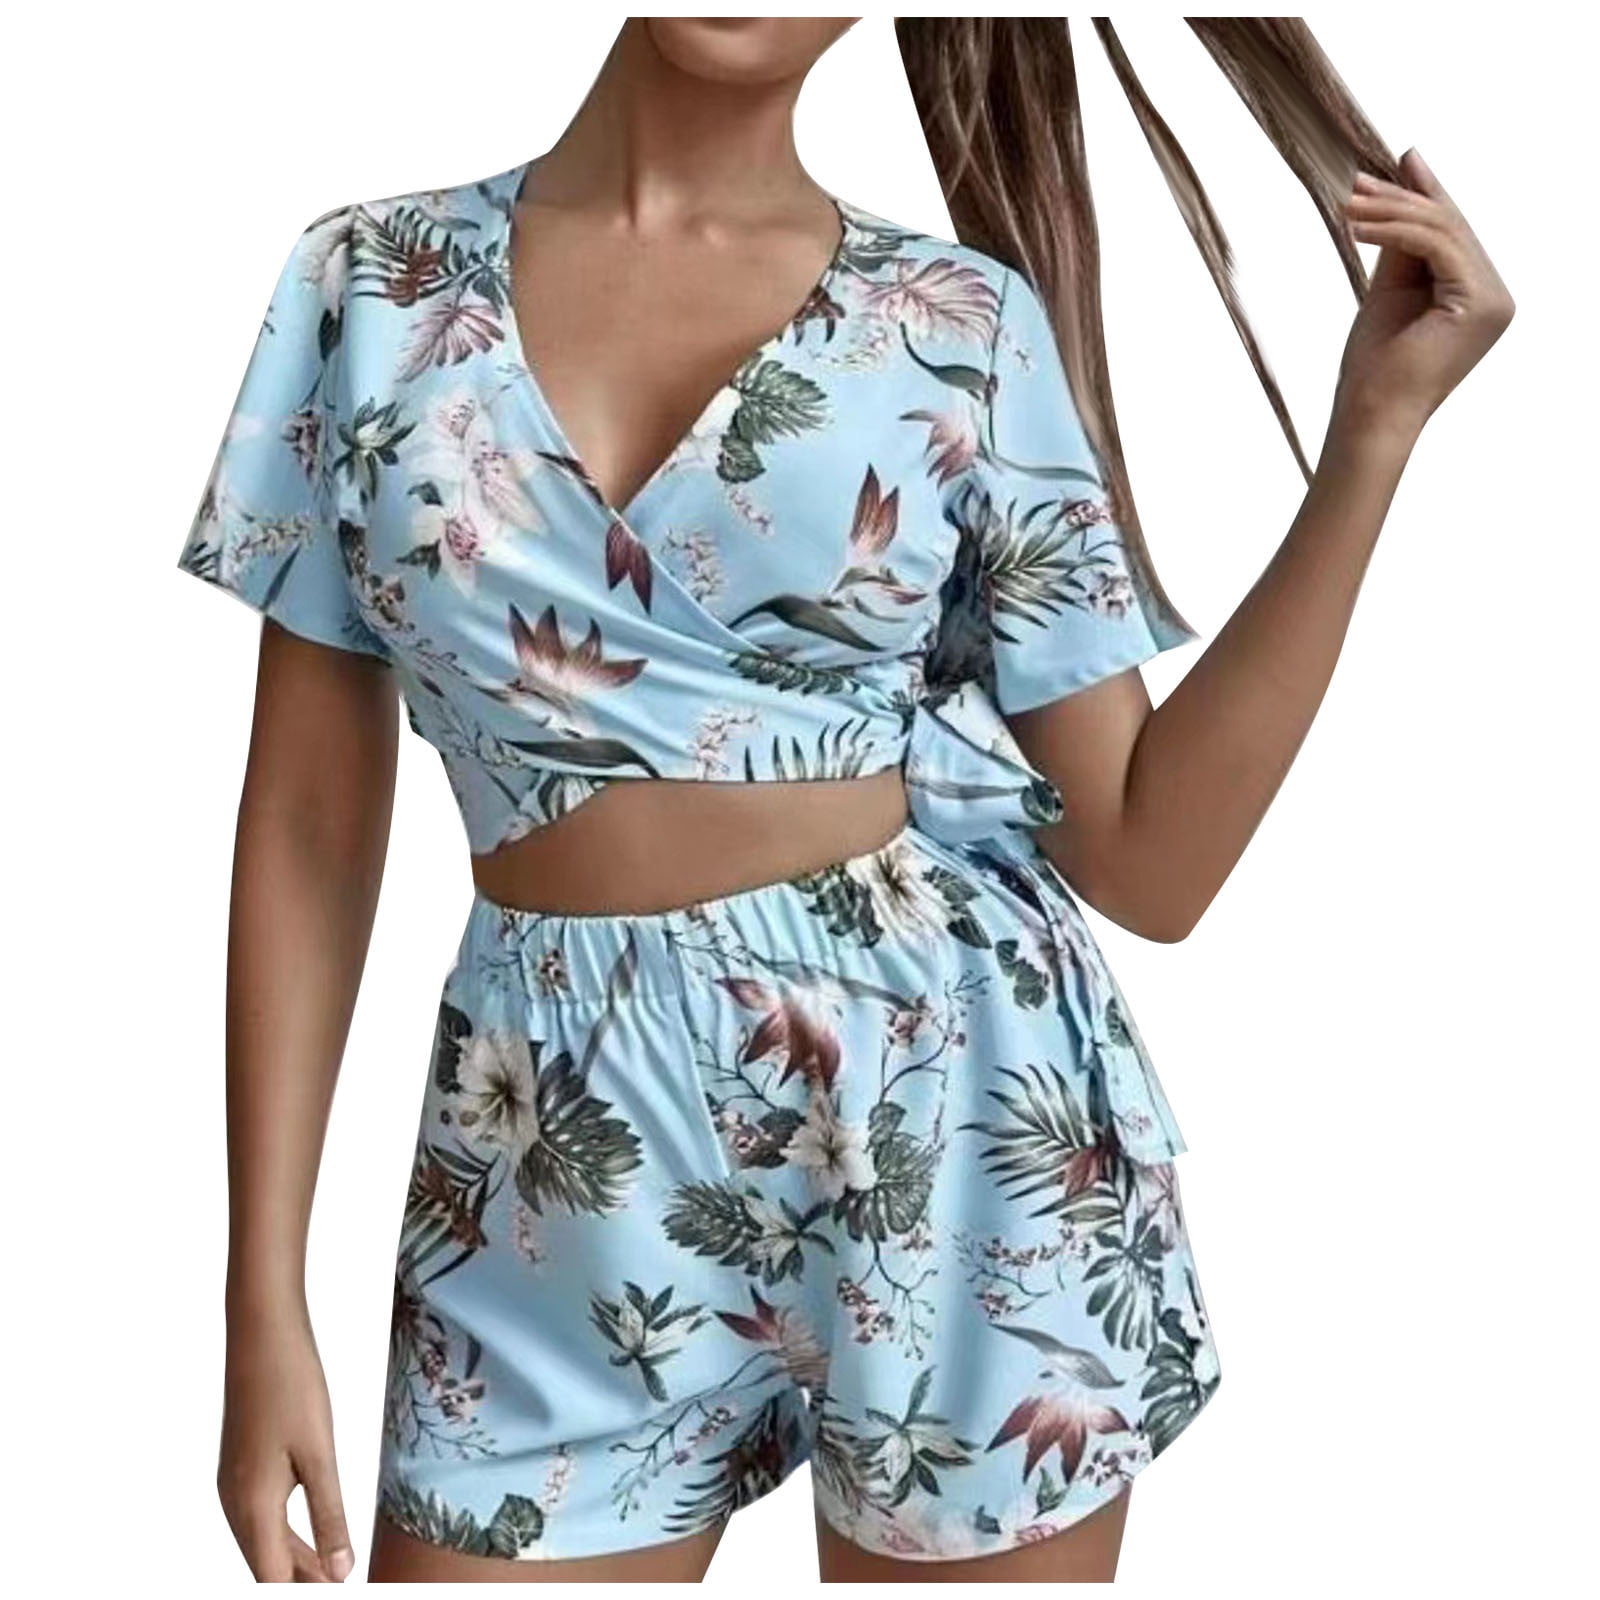  Plus Size Boho 2 Piece Outfits for Women Summer V Neck Leaves  Print Crop Top Shorts Set : Clothing, Shoes & Jewelry